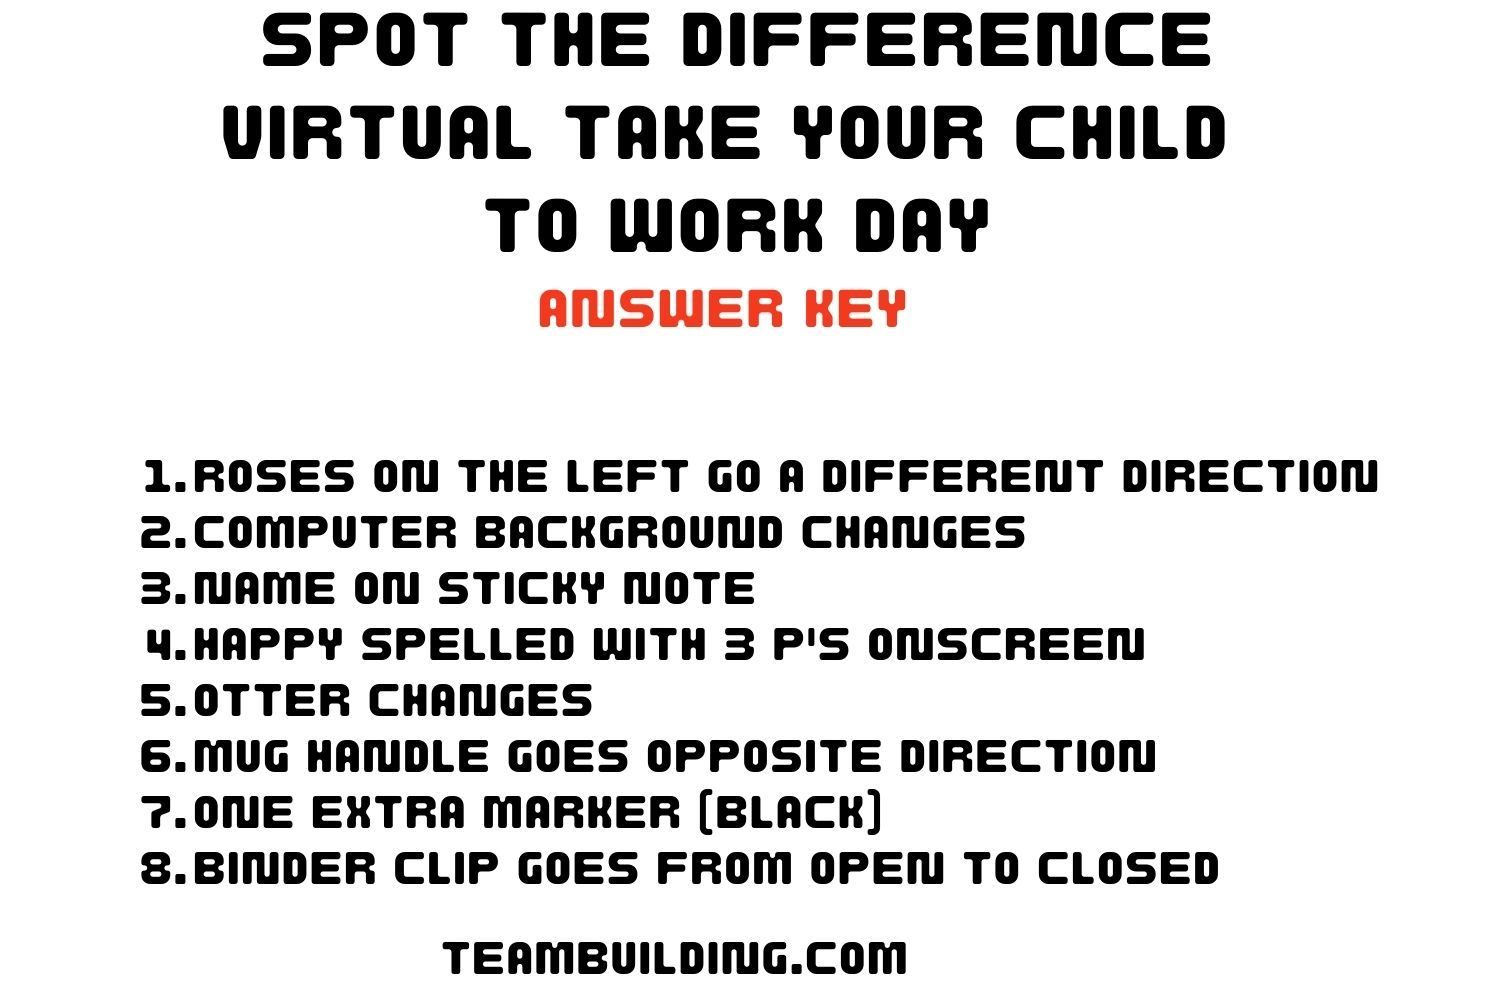 Take Your Child to Work Day Spot the Difference Answer Key